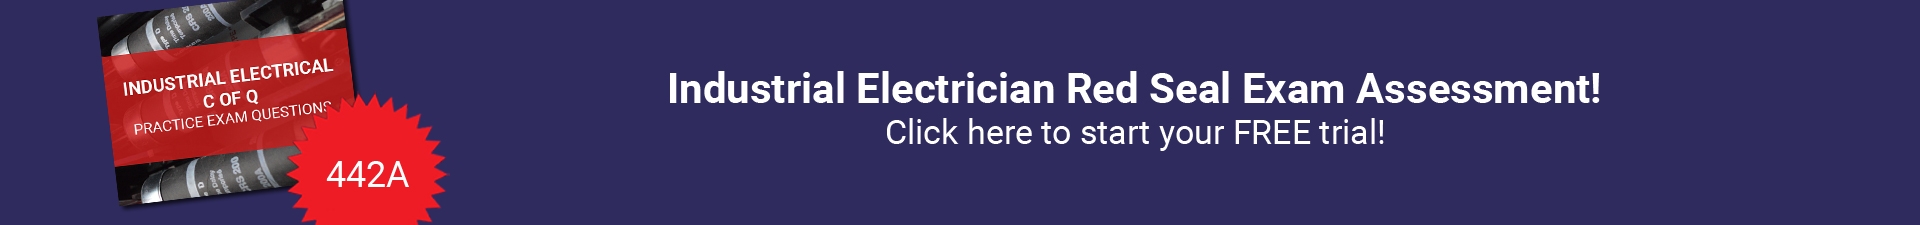 Industrial Electrician (442A) Free Assessment